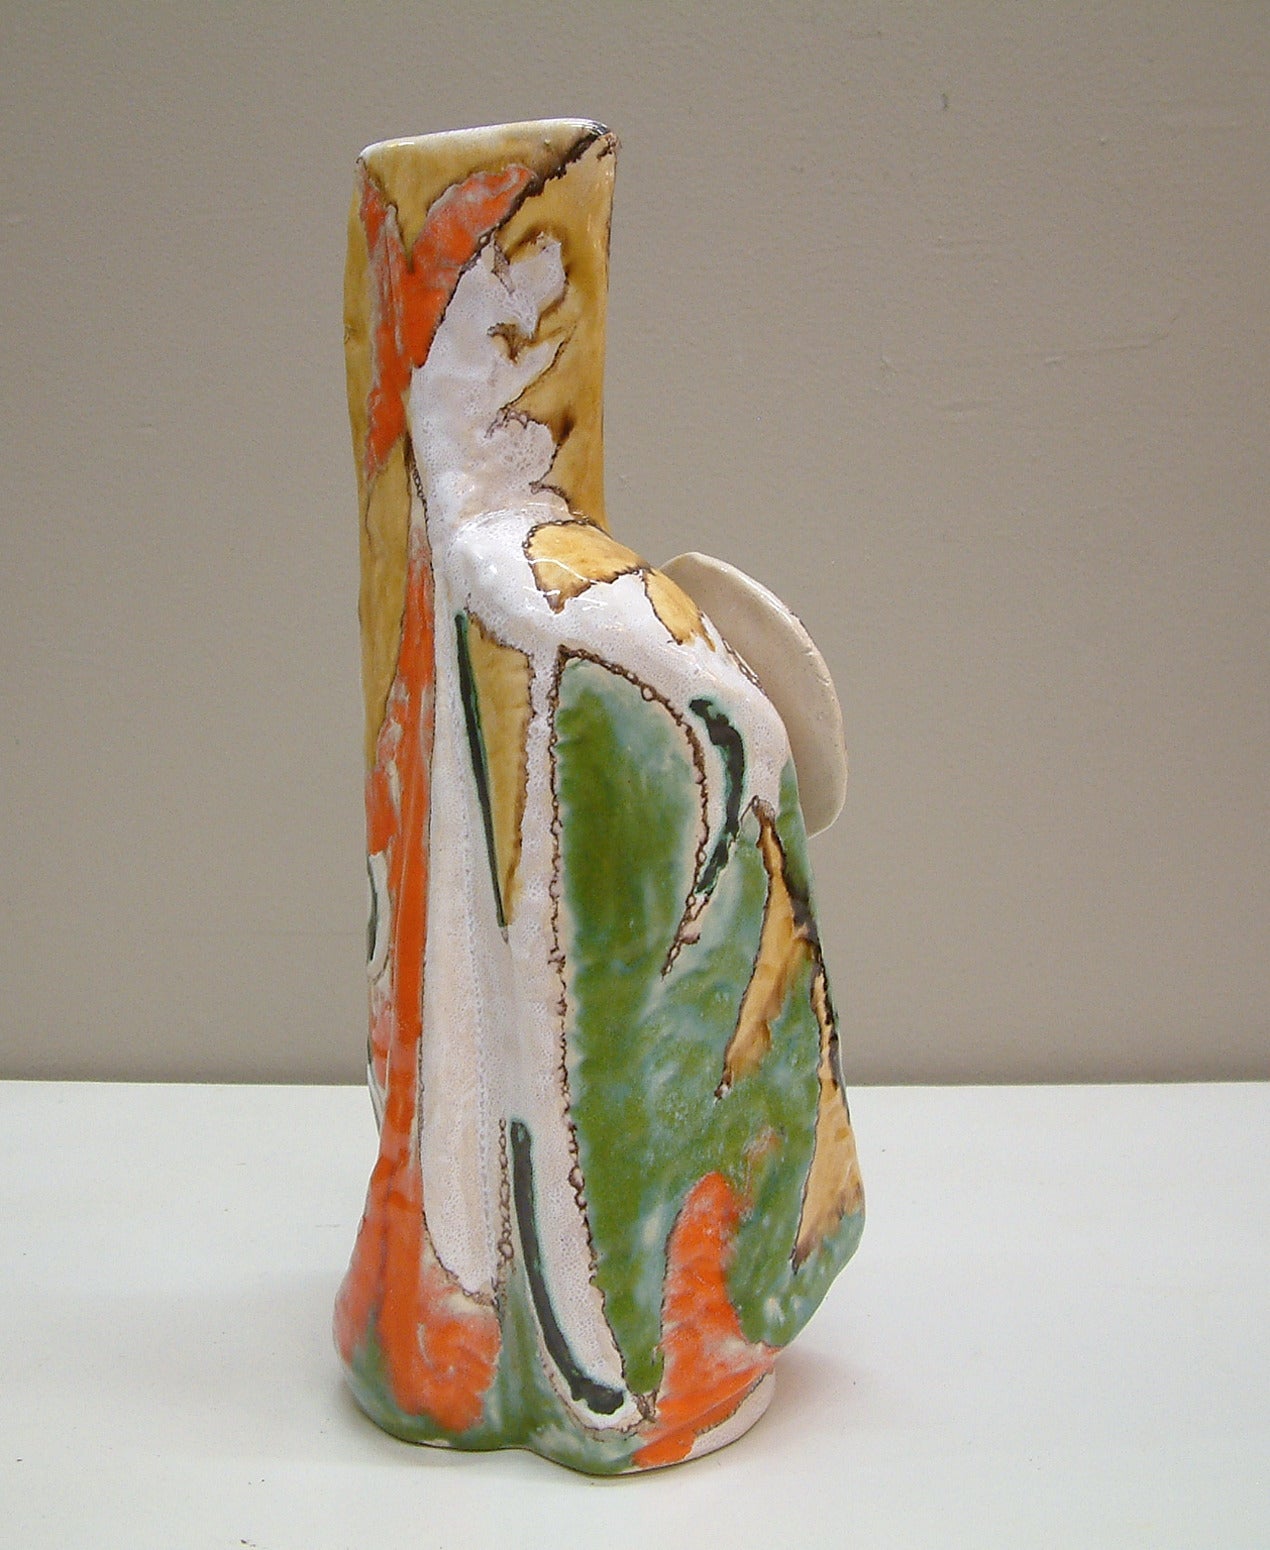 A hi-glaze figurative vase by master potter Elio Schiavon who studied at the Scuola d'Arte Ceramica di Nove and later opened a furnace in Padova, Italy in 1954. Schiavon was born in Padova in 1925 and participated in and won awards in many